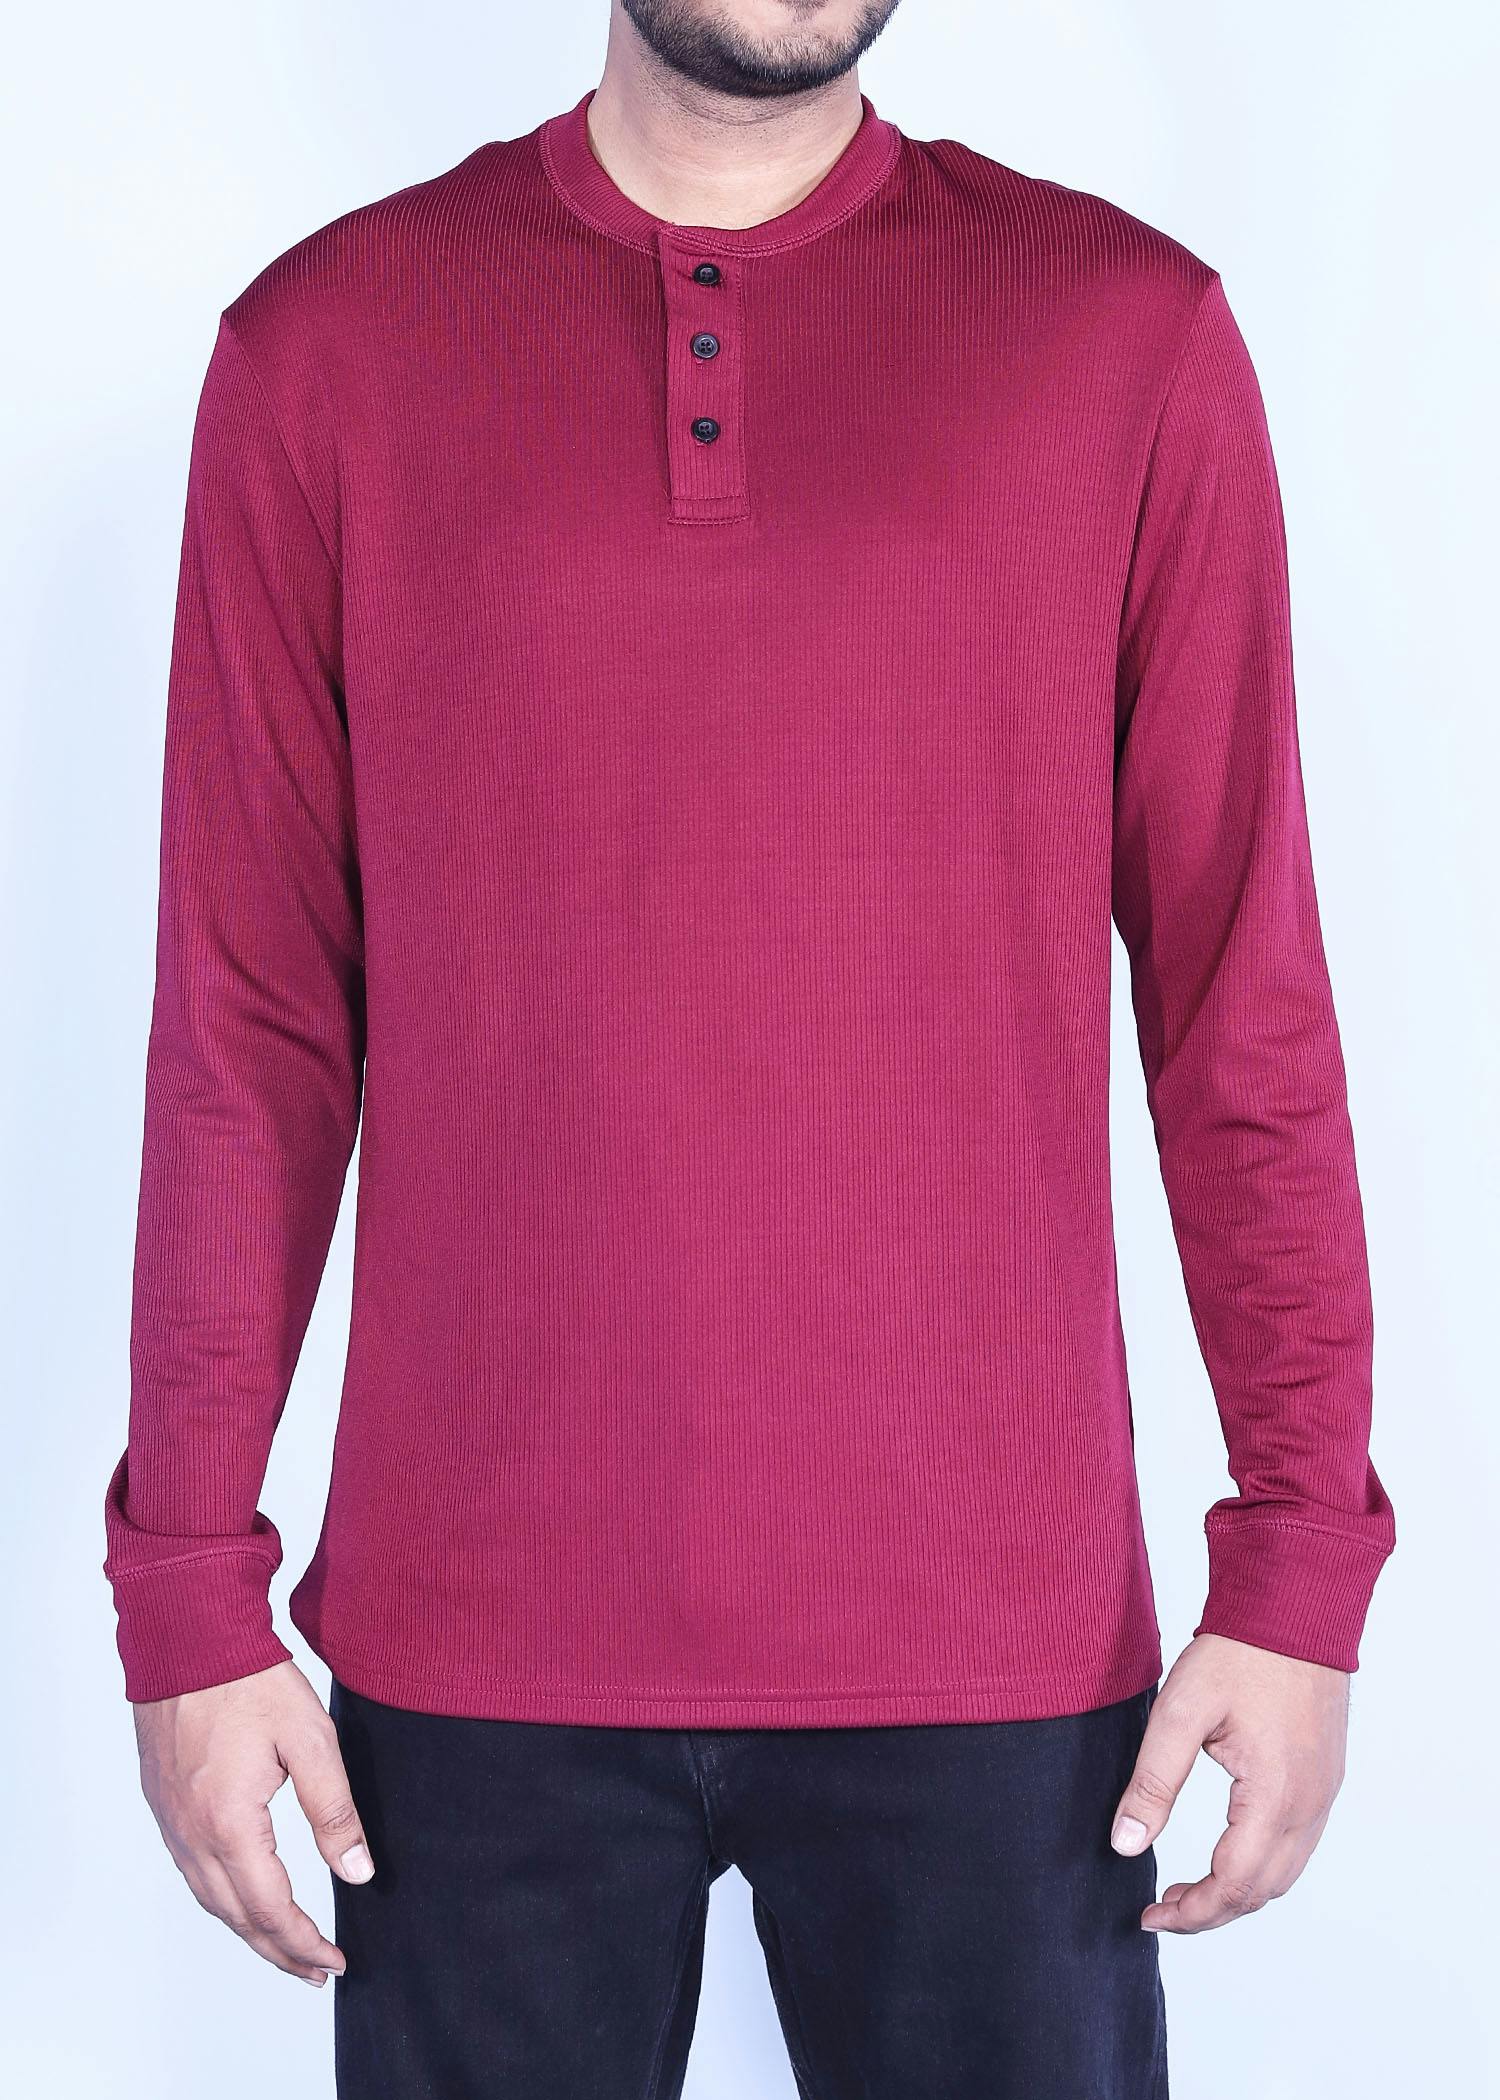 iwi henley ls t shirt maroon color half front view